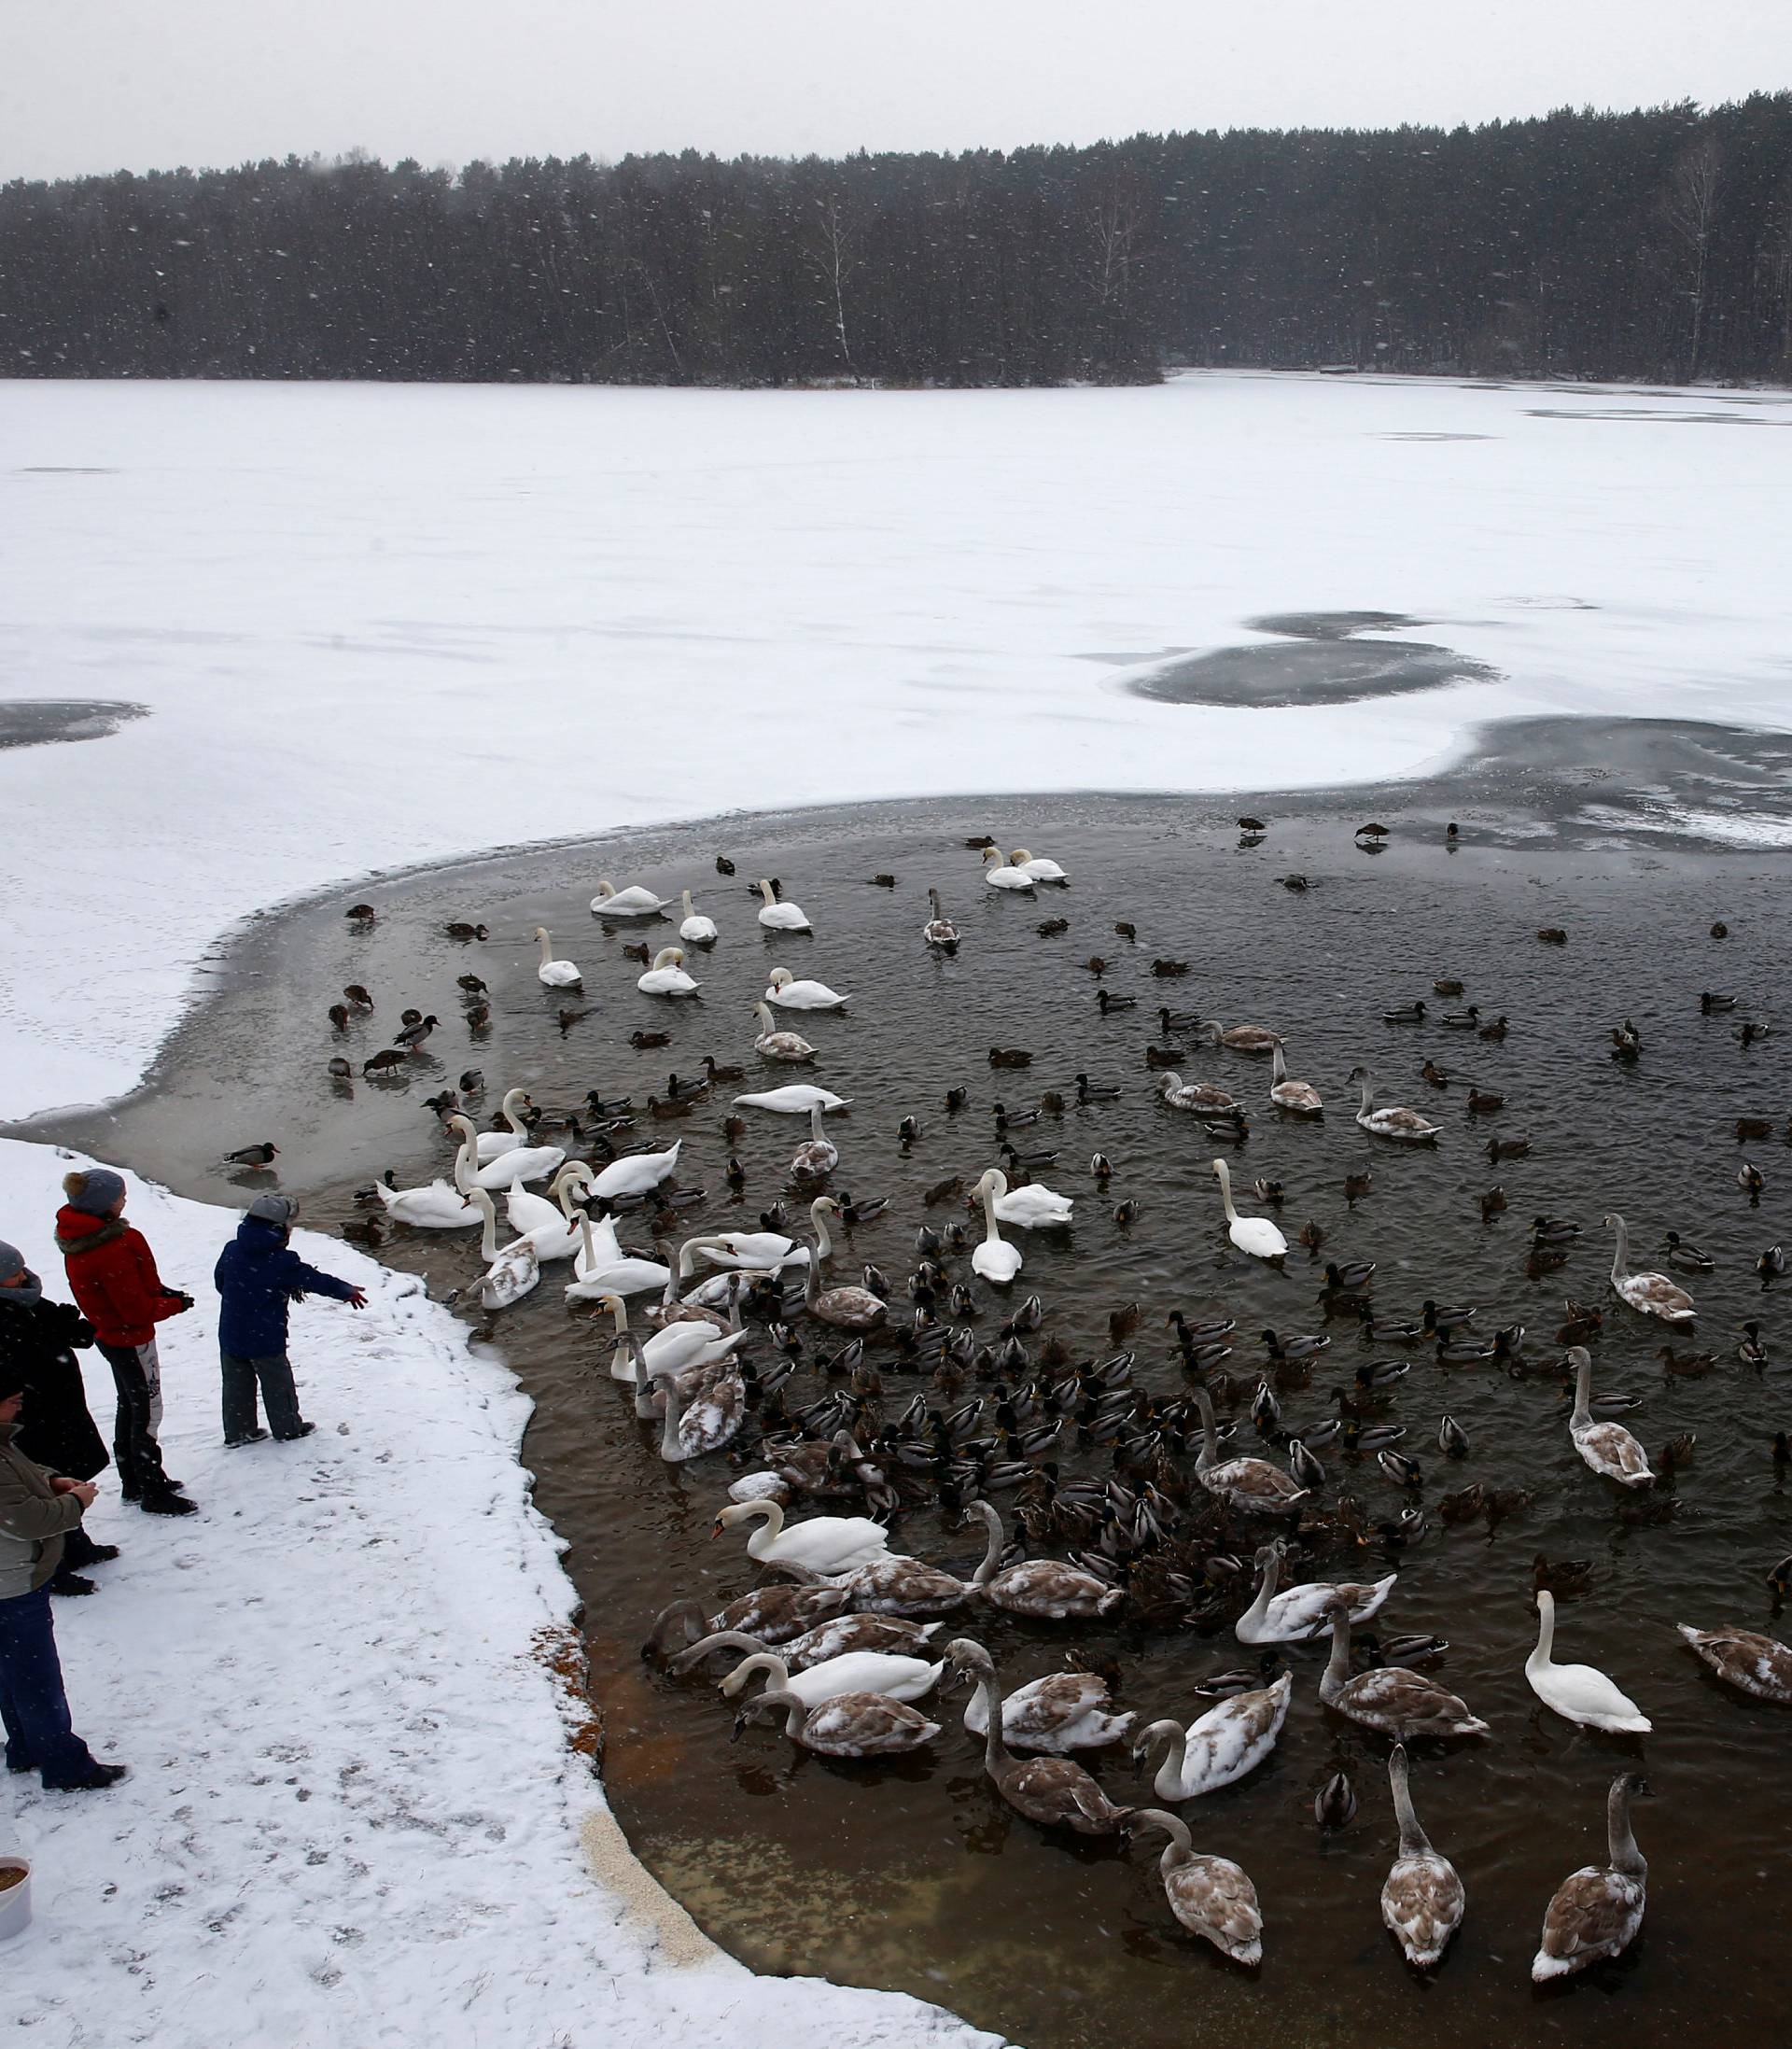 People feeds mute swans and mallards in a lake during snowy winter day on the outskirts of Minsk